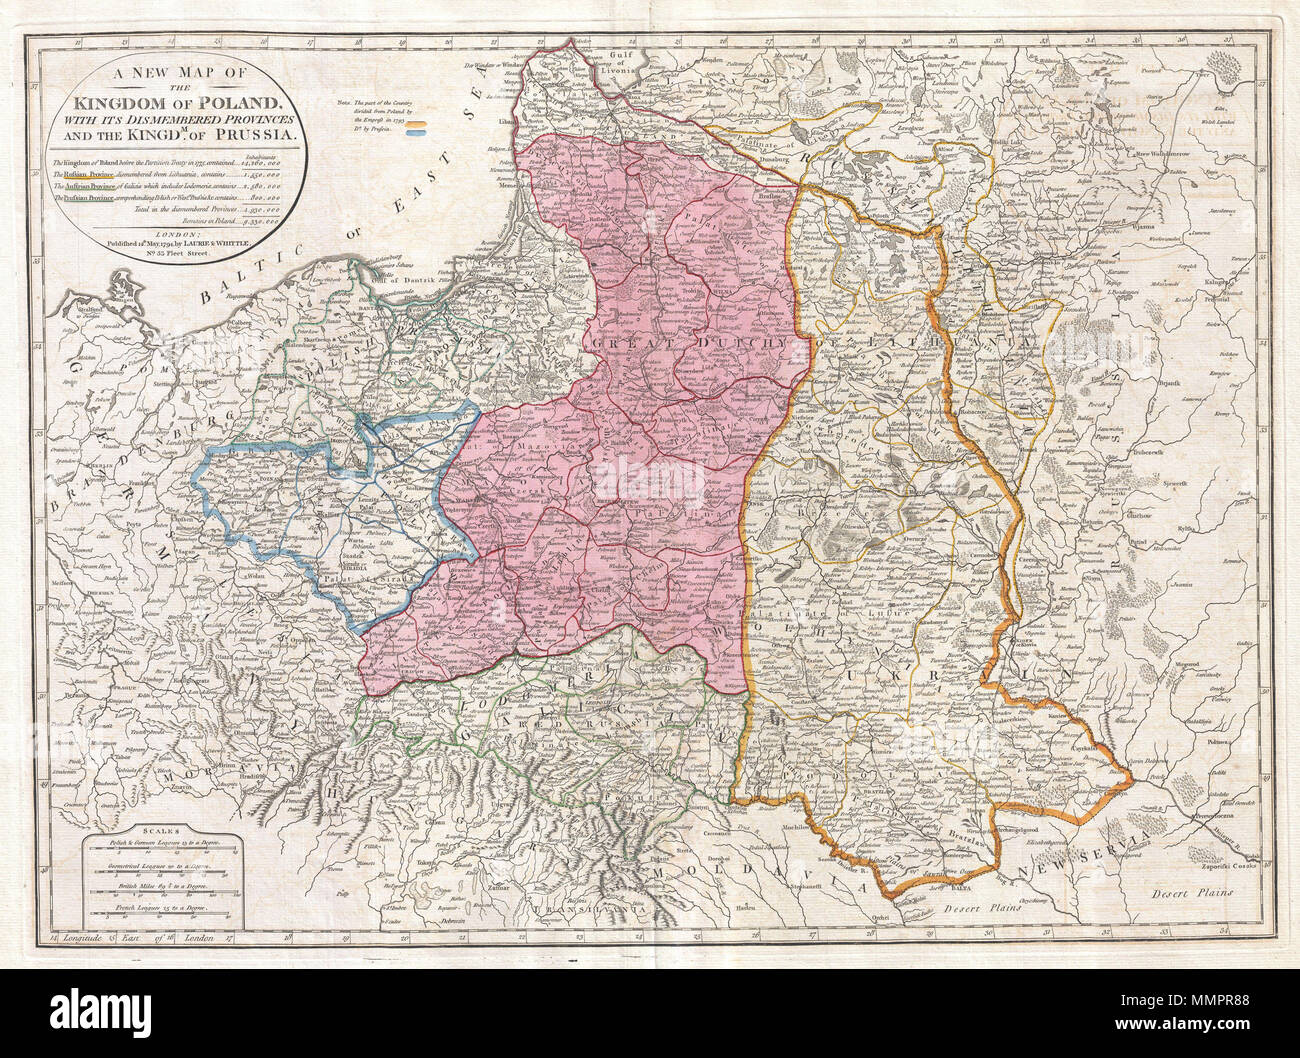 .  English: This important 1794 map by Thomas Kitchin depicts the Kingdom of Poland during the brief transitional period between the second and third partitions. Covers from Brandenburg to Russia and from the Gulf of Livonia to Moldova and Hungary, including all of Poland and the Grand Duchy of Lithuania, parts of Prussia, Russia, Livonia, Hungary, Germany and Austria. This map depicts Poland in 1794, immediately following the Second Partition of Poland in 1793. By the mid 18th century Poland, due to an inefficient and corrupt internal bureaucracy, had lost much of its autonomy to its aggressi Stock Photo